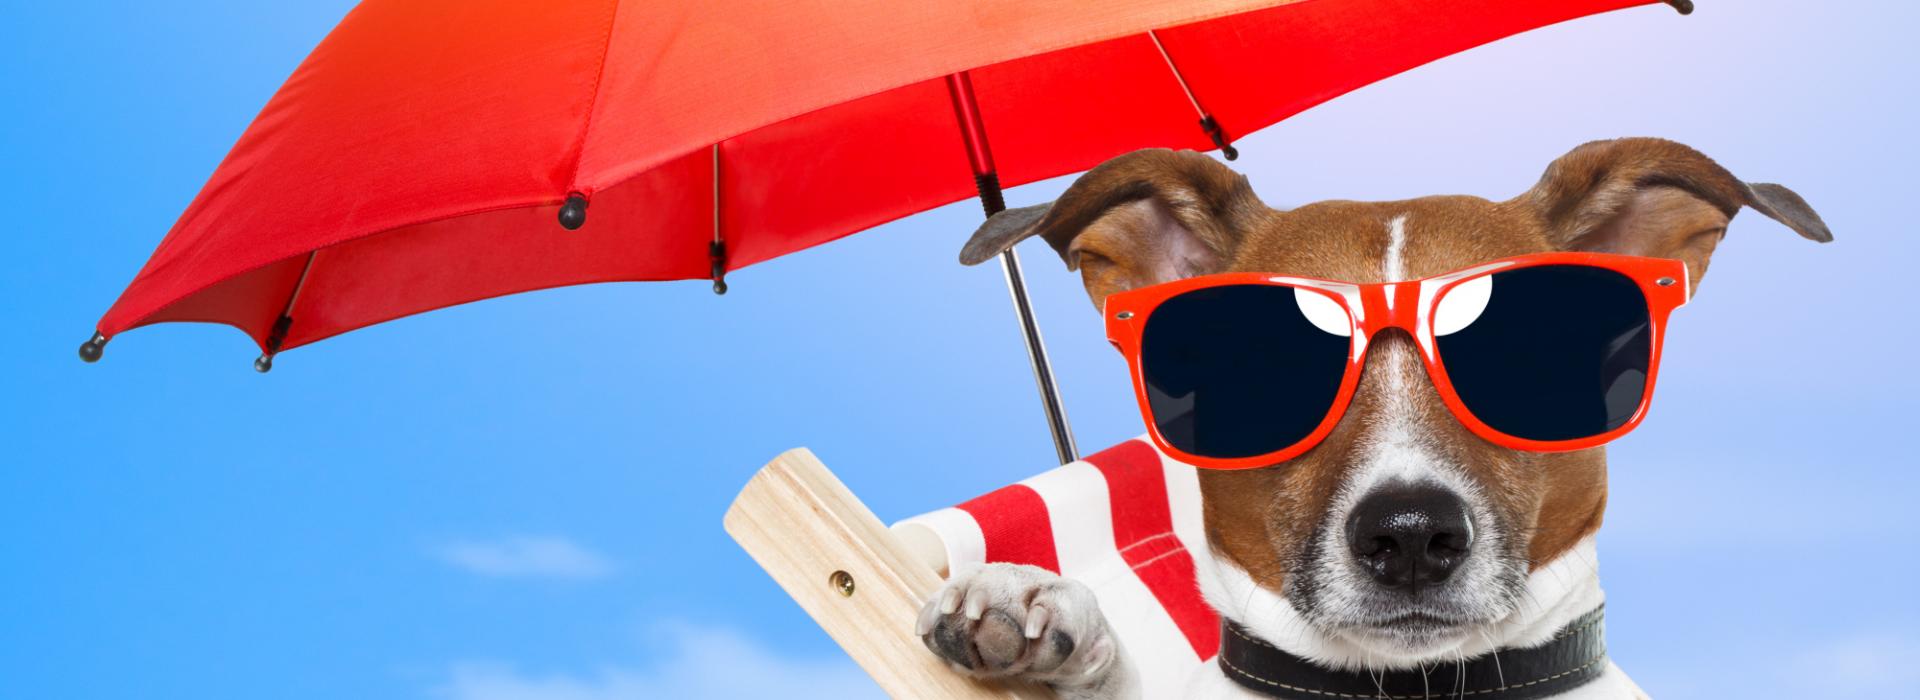 Summer under the umbrella with your dog